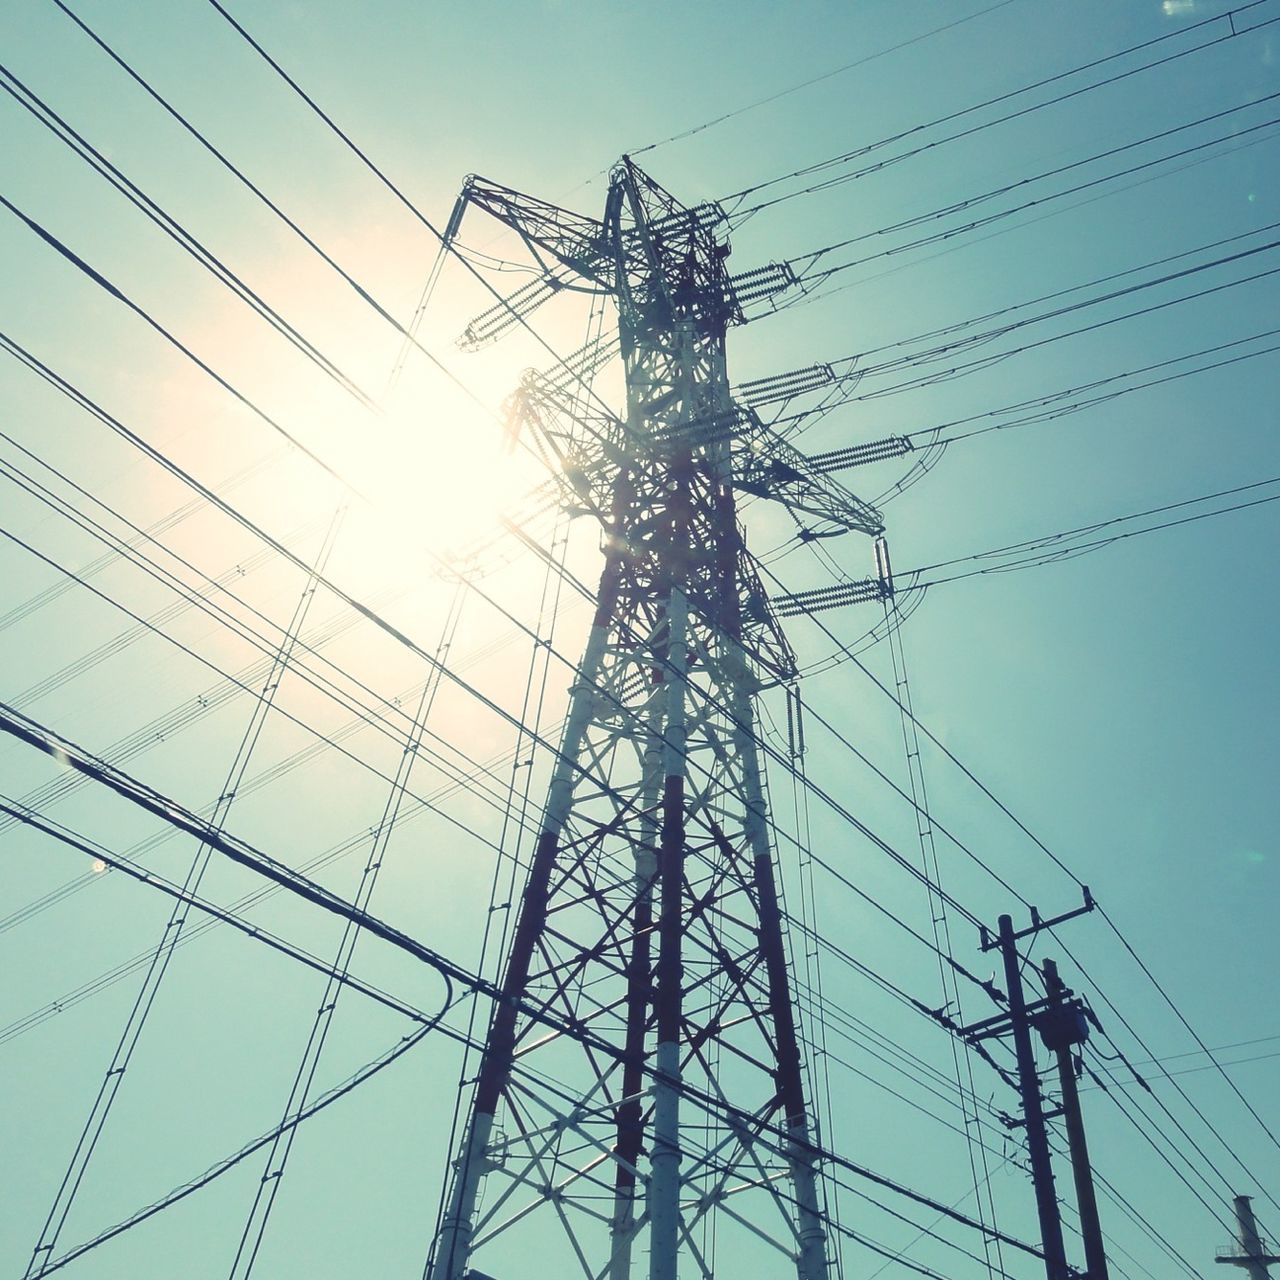 power line, electricity pylon, electricity, power supply, low angle view, cable, connection, fuel and power generation, technology, complexity, power cable, clear sky, sky, silhouette, outdoors, built structure, no people, day, wire, electricity tower